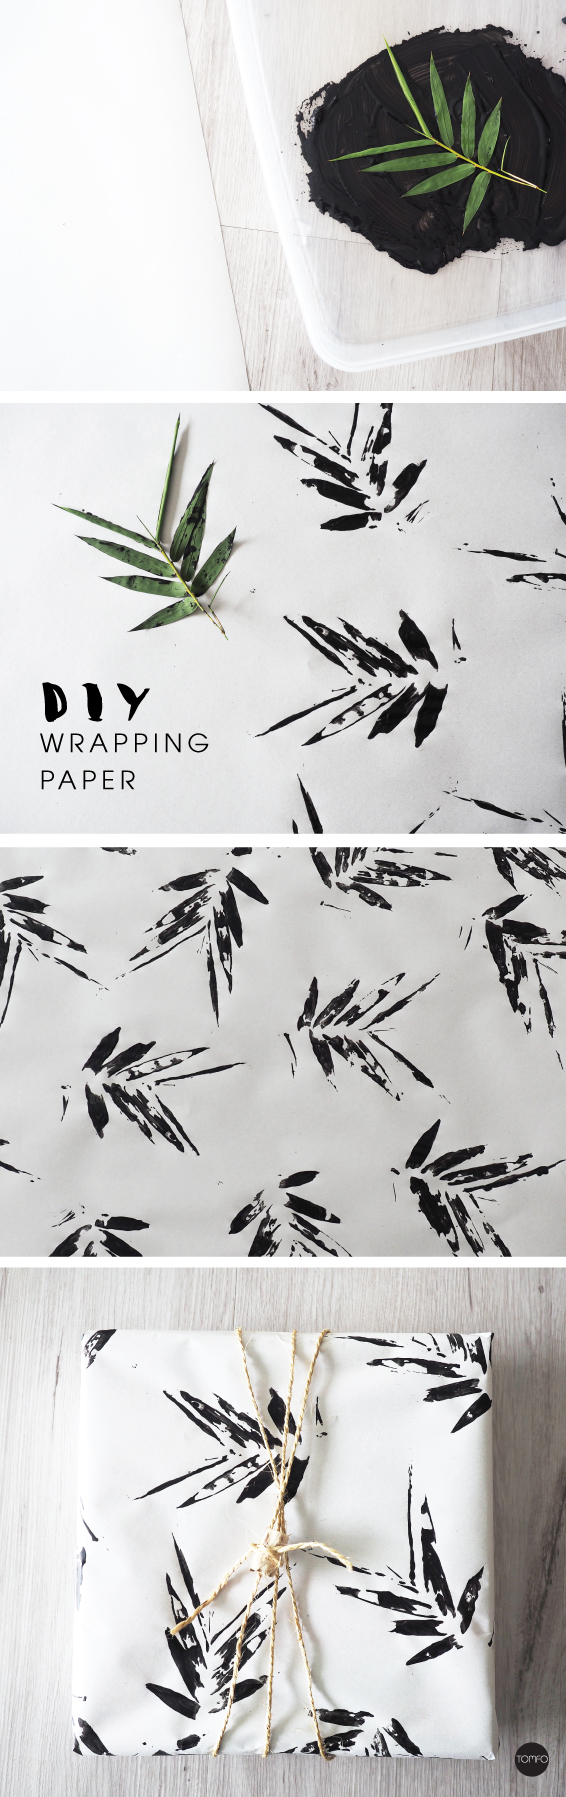 DIY-Wrapping-paper